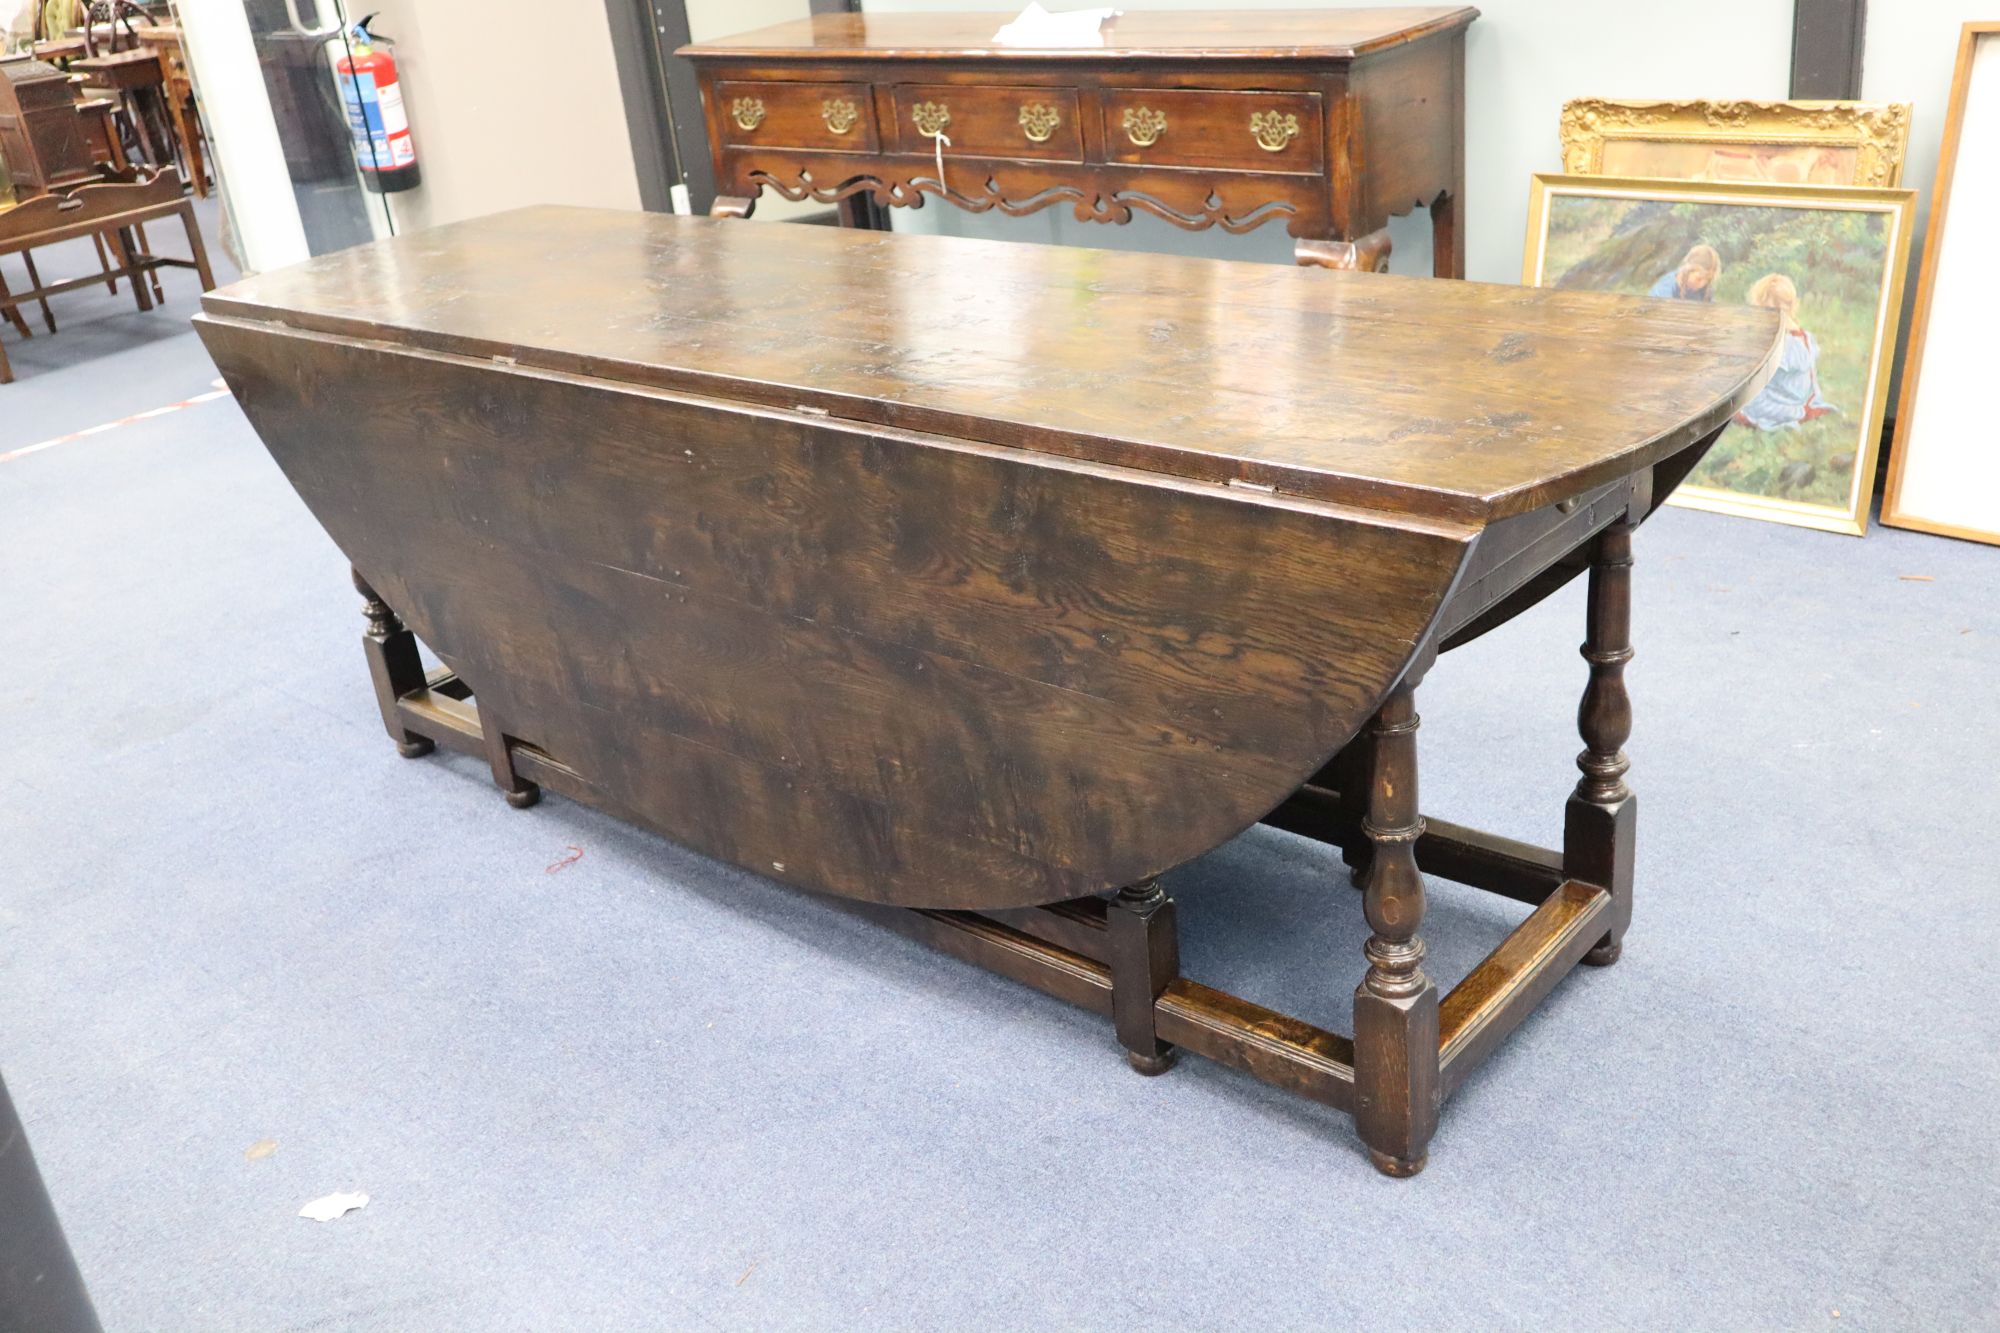 A late 17th century style oak oval topped, double gate leg dining table, width 214cm depth 180cm (extended) height 75cm